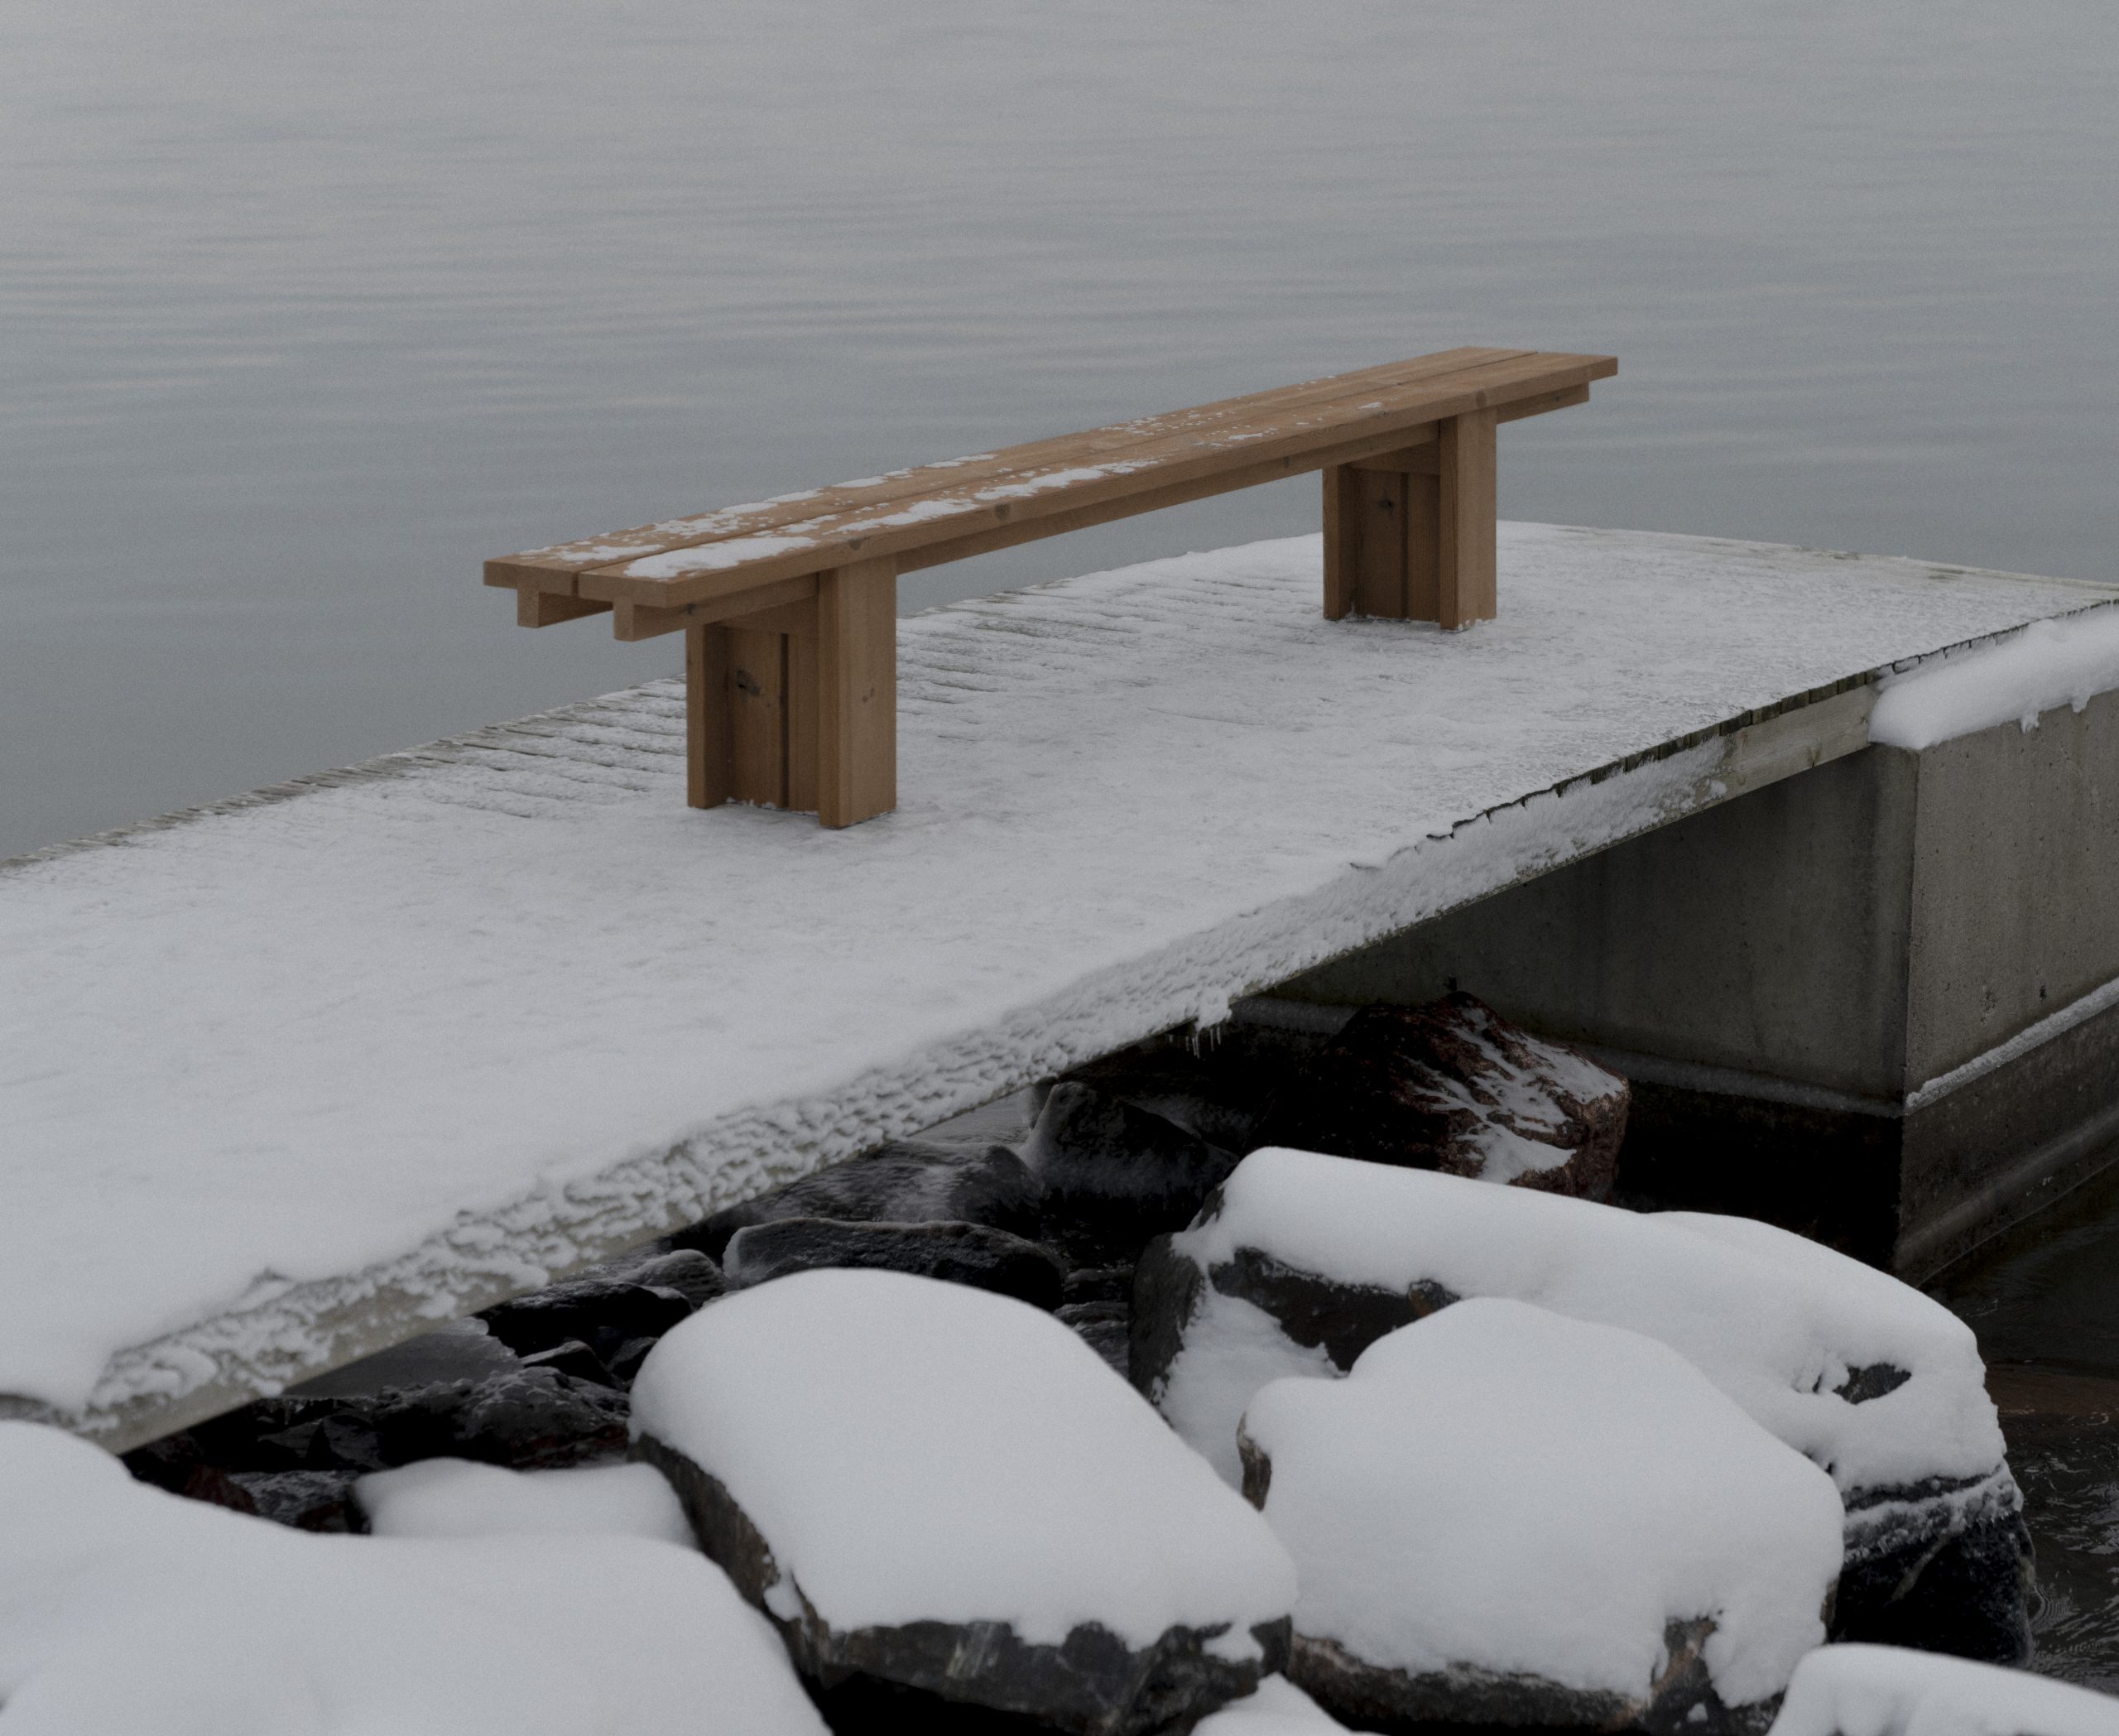 013 Osa Outdoor bench in winter.